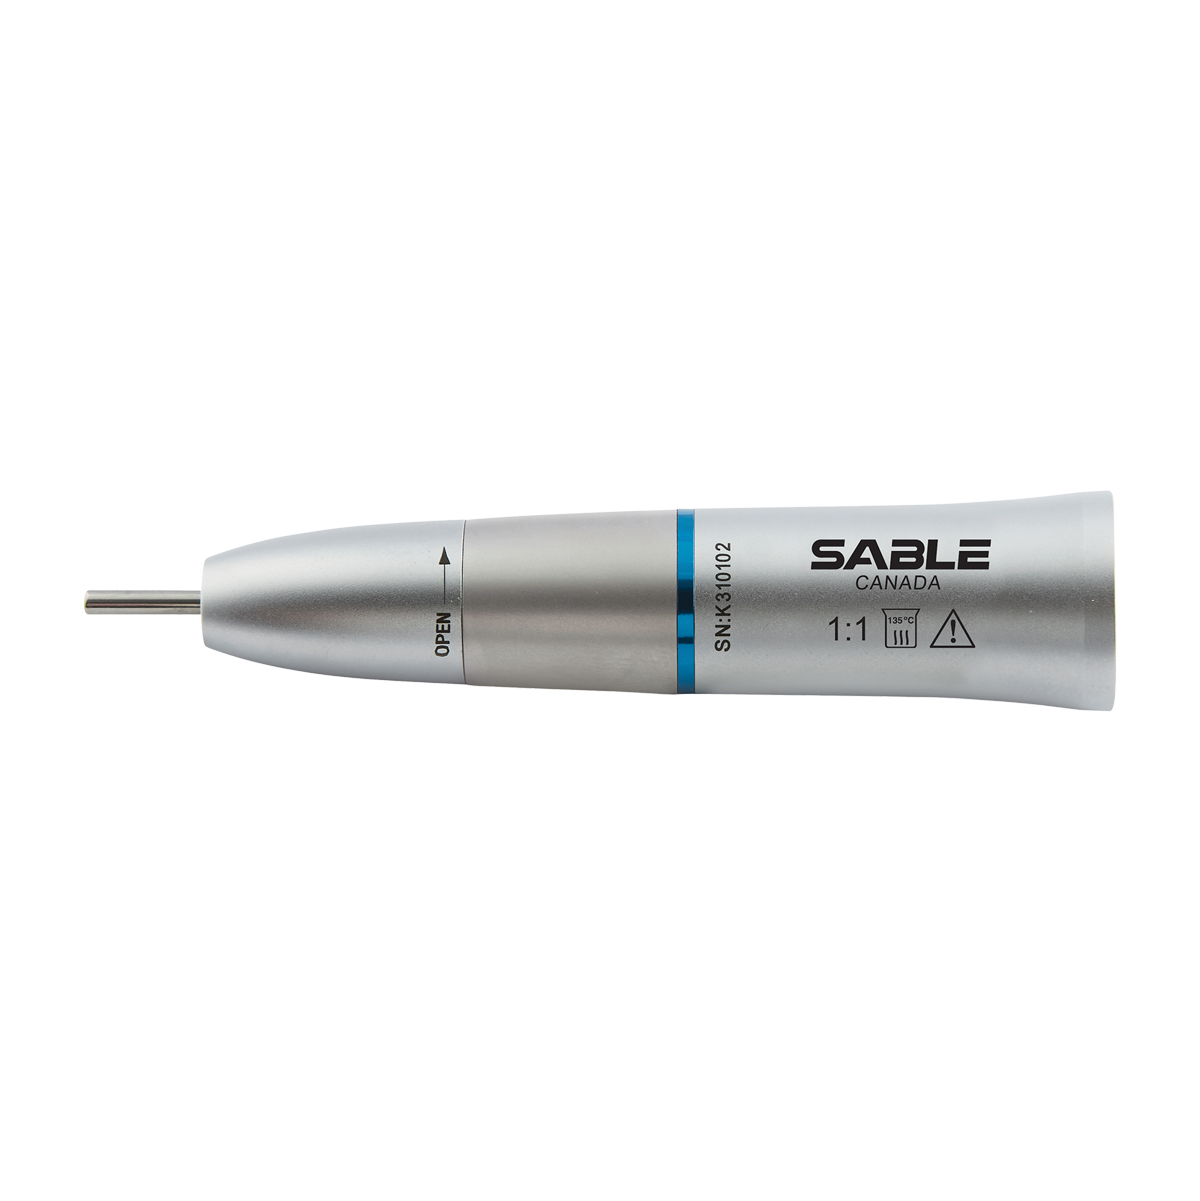 Sable 1:1 Straight Nosecone